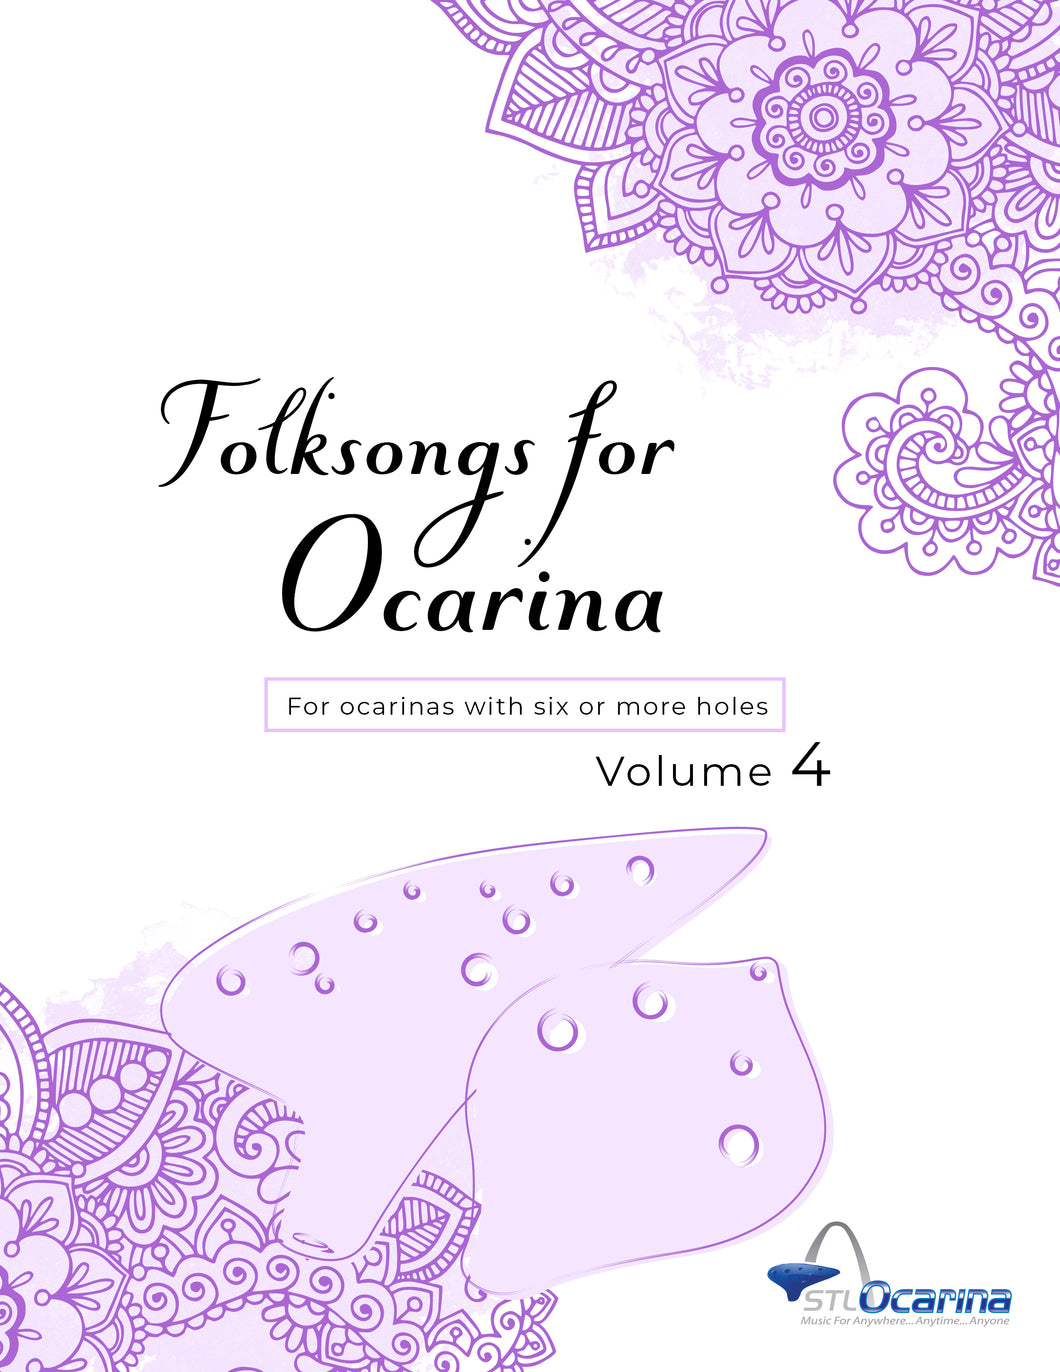 Folksongs for Ocarinas and Treble Instruments Volume 4